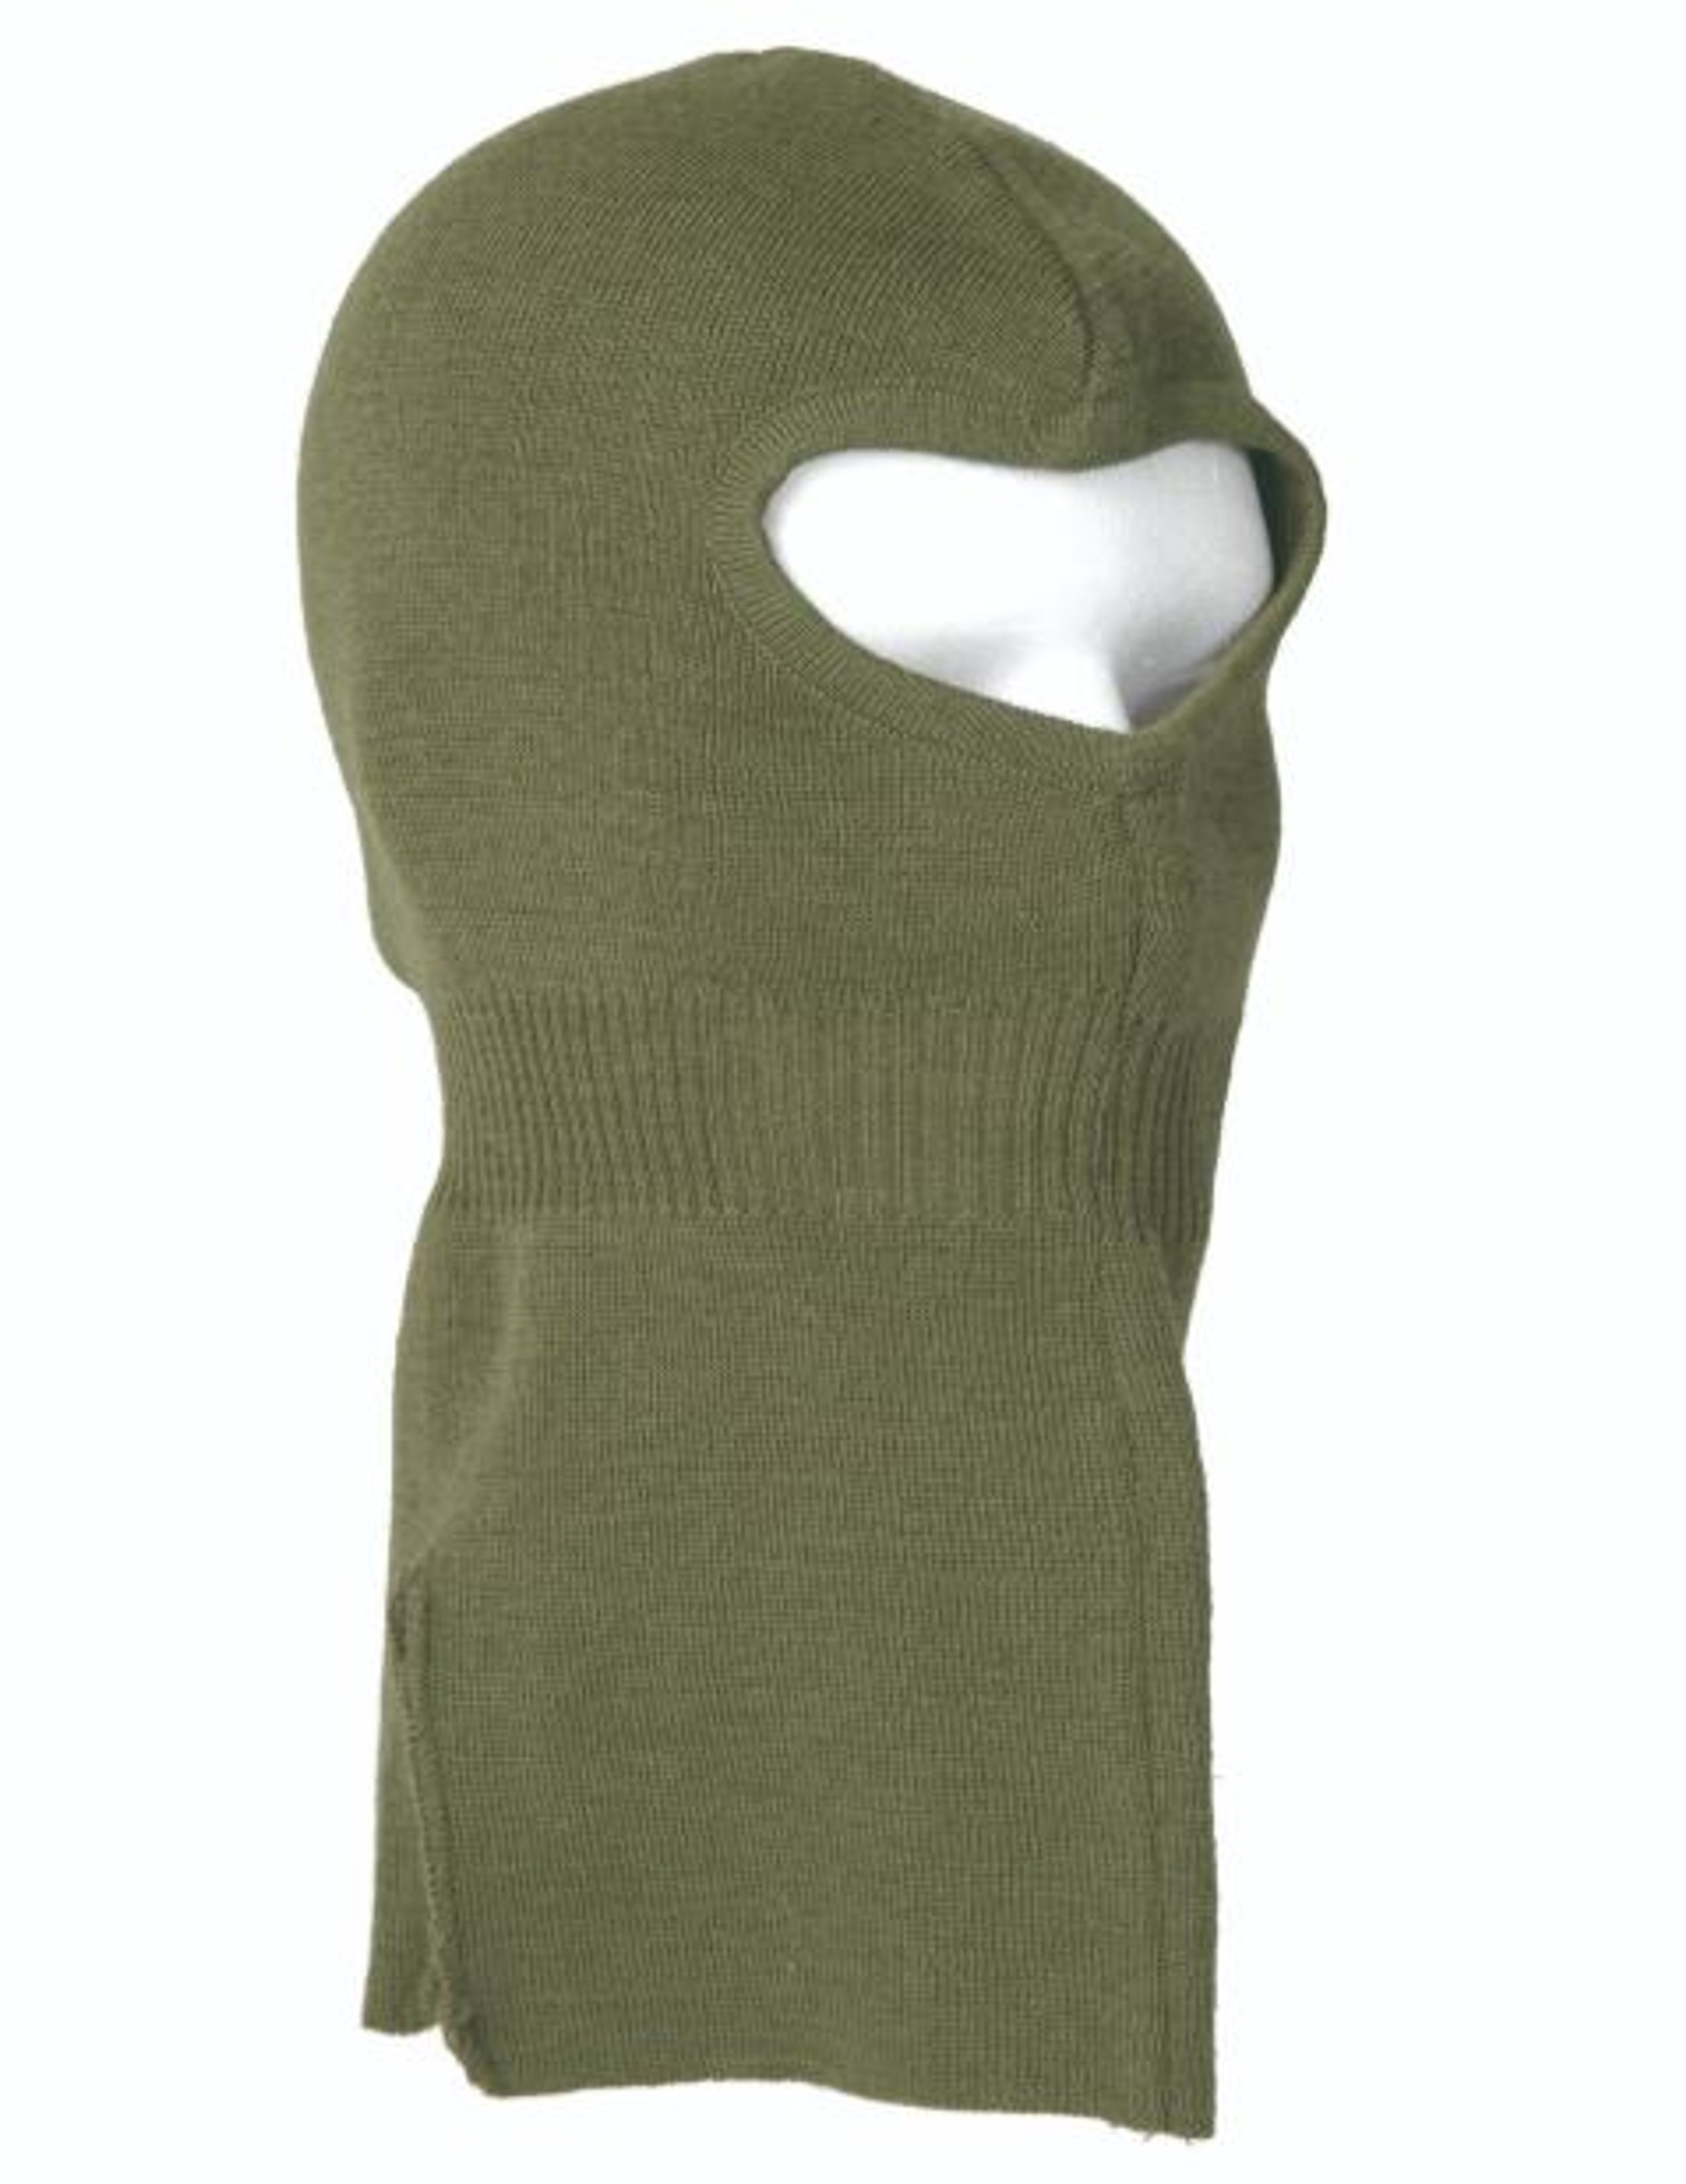 MIL-TEC OD Wool Cold Weather Face Mask